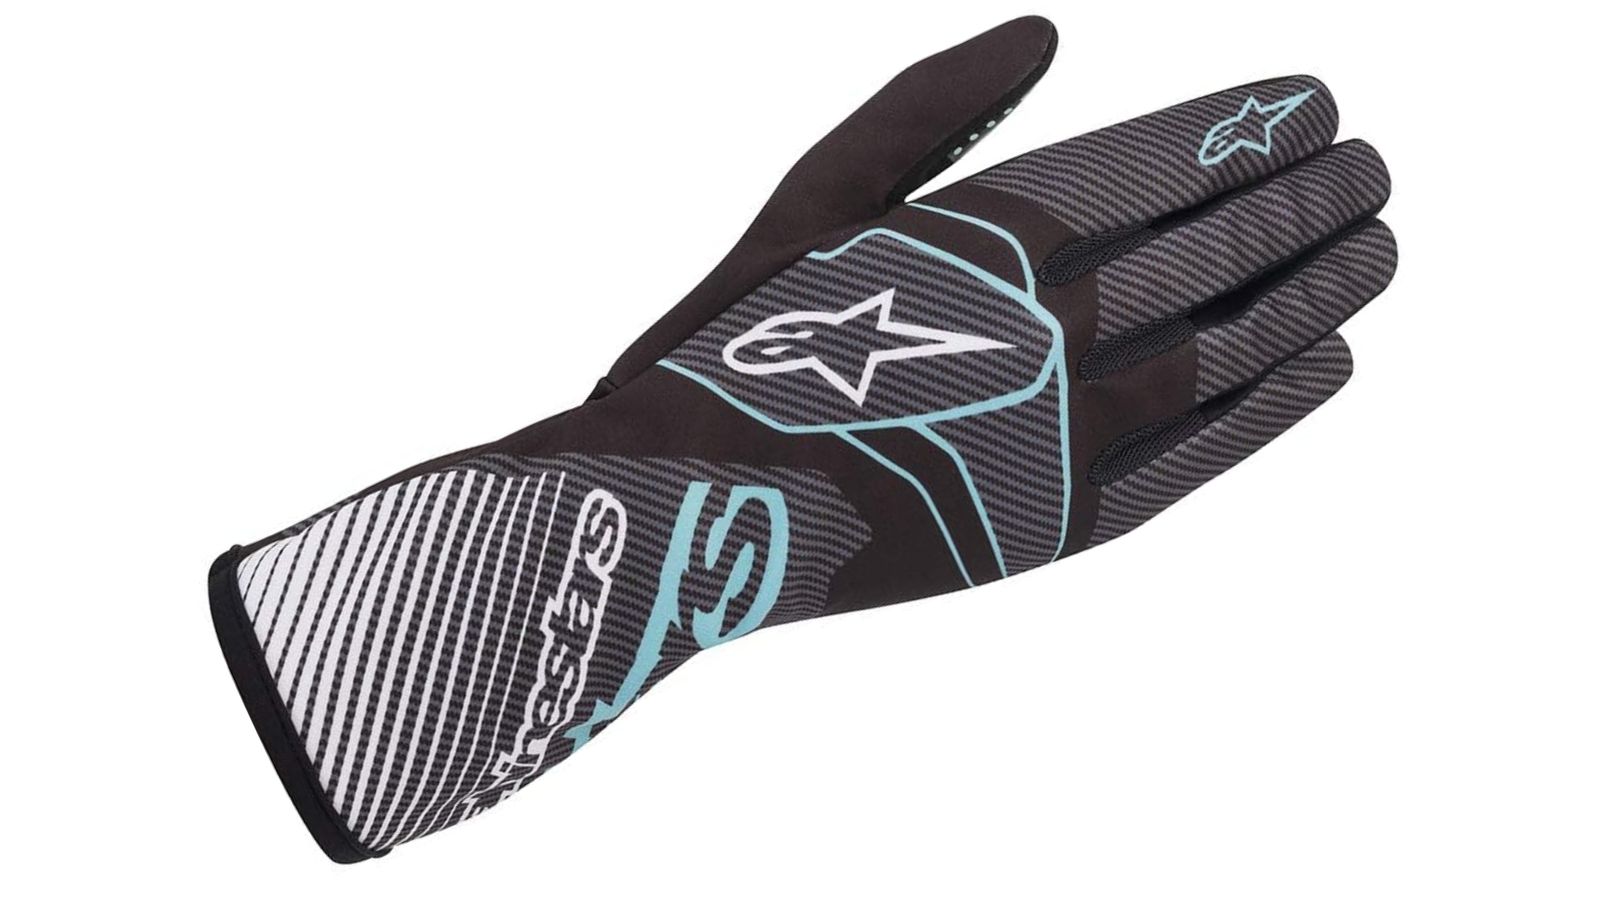 Alpinestars Tech 1-K Race V2 product image of a black racing glove with white and light blue trim.